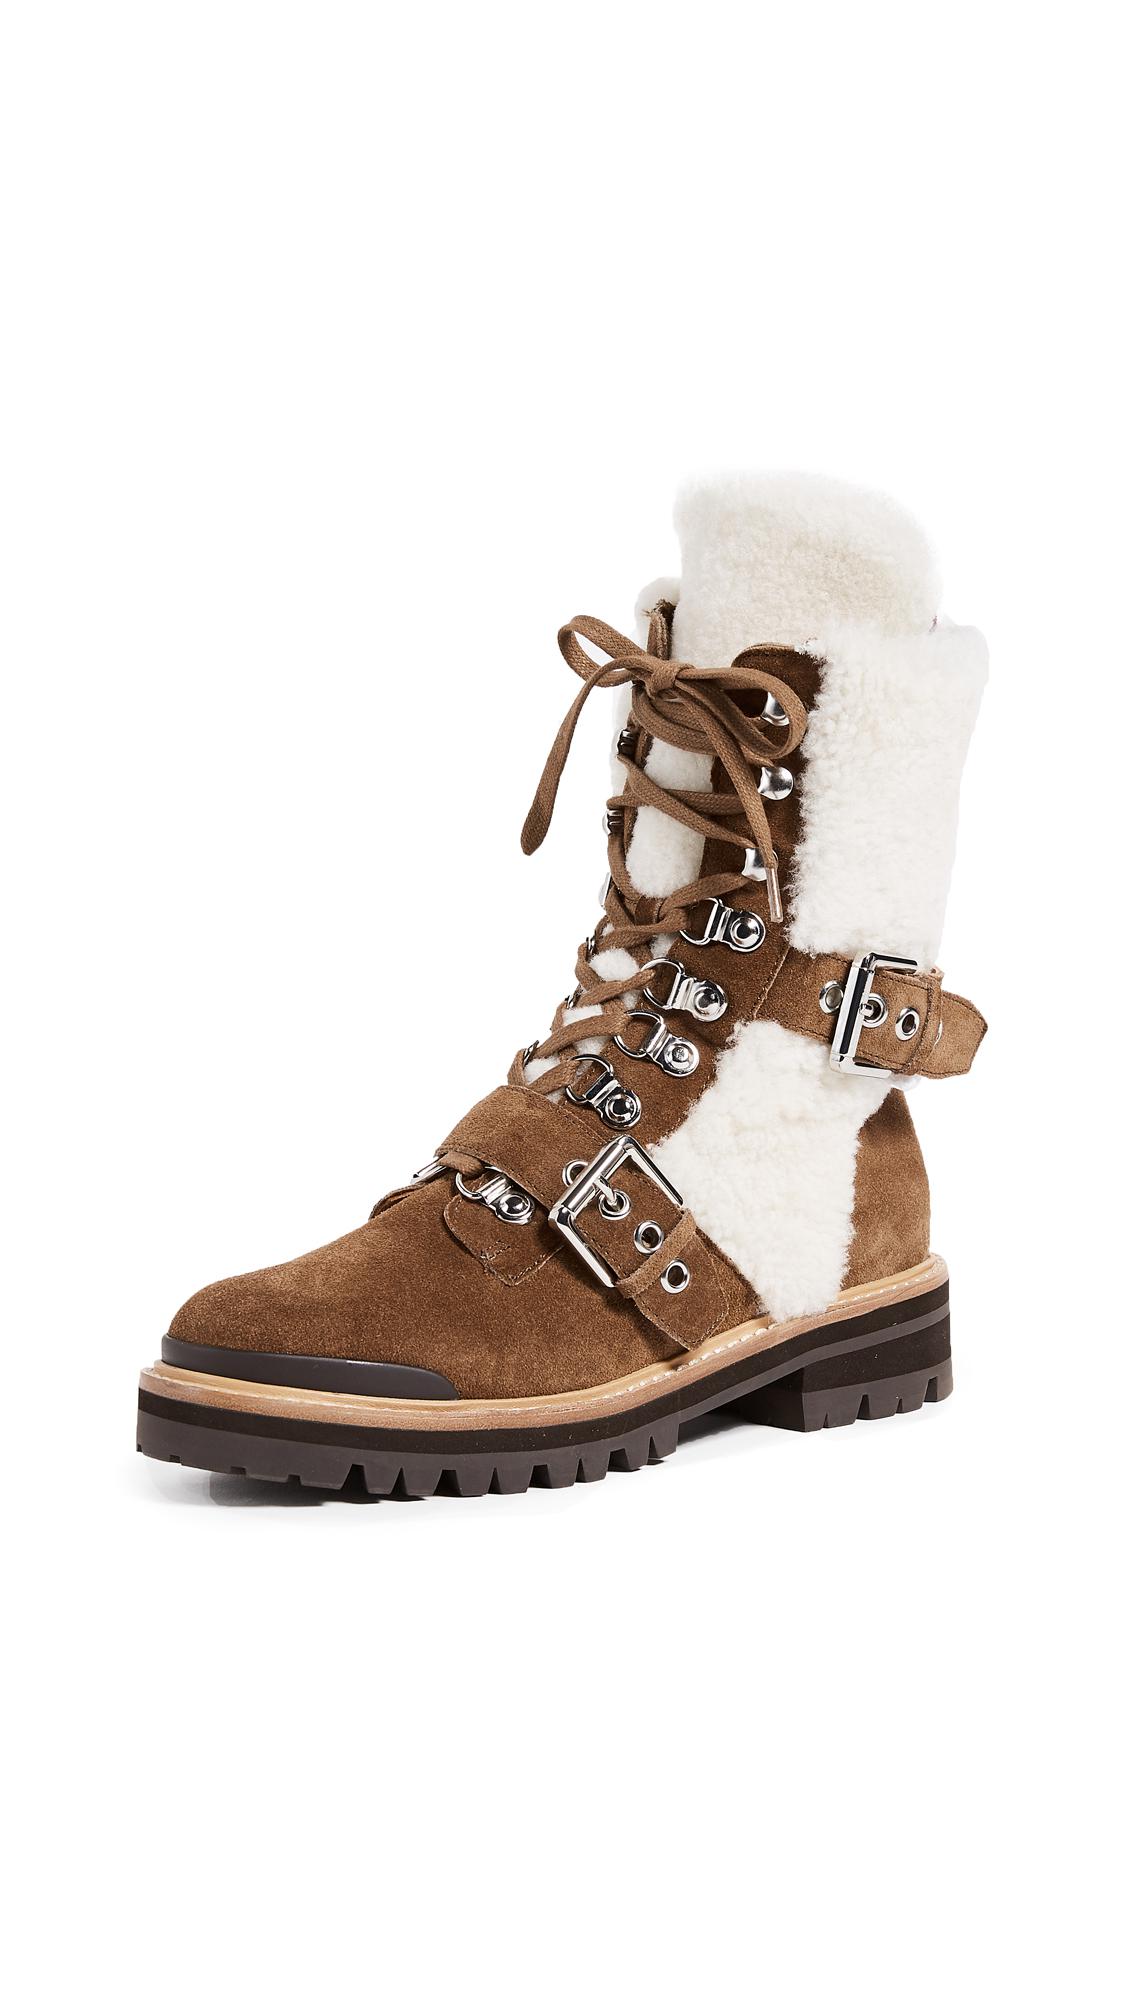 Lyst - Sigerson Morrison Iris Shearling Buckle Boots in Brown